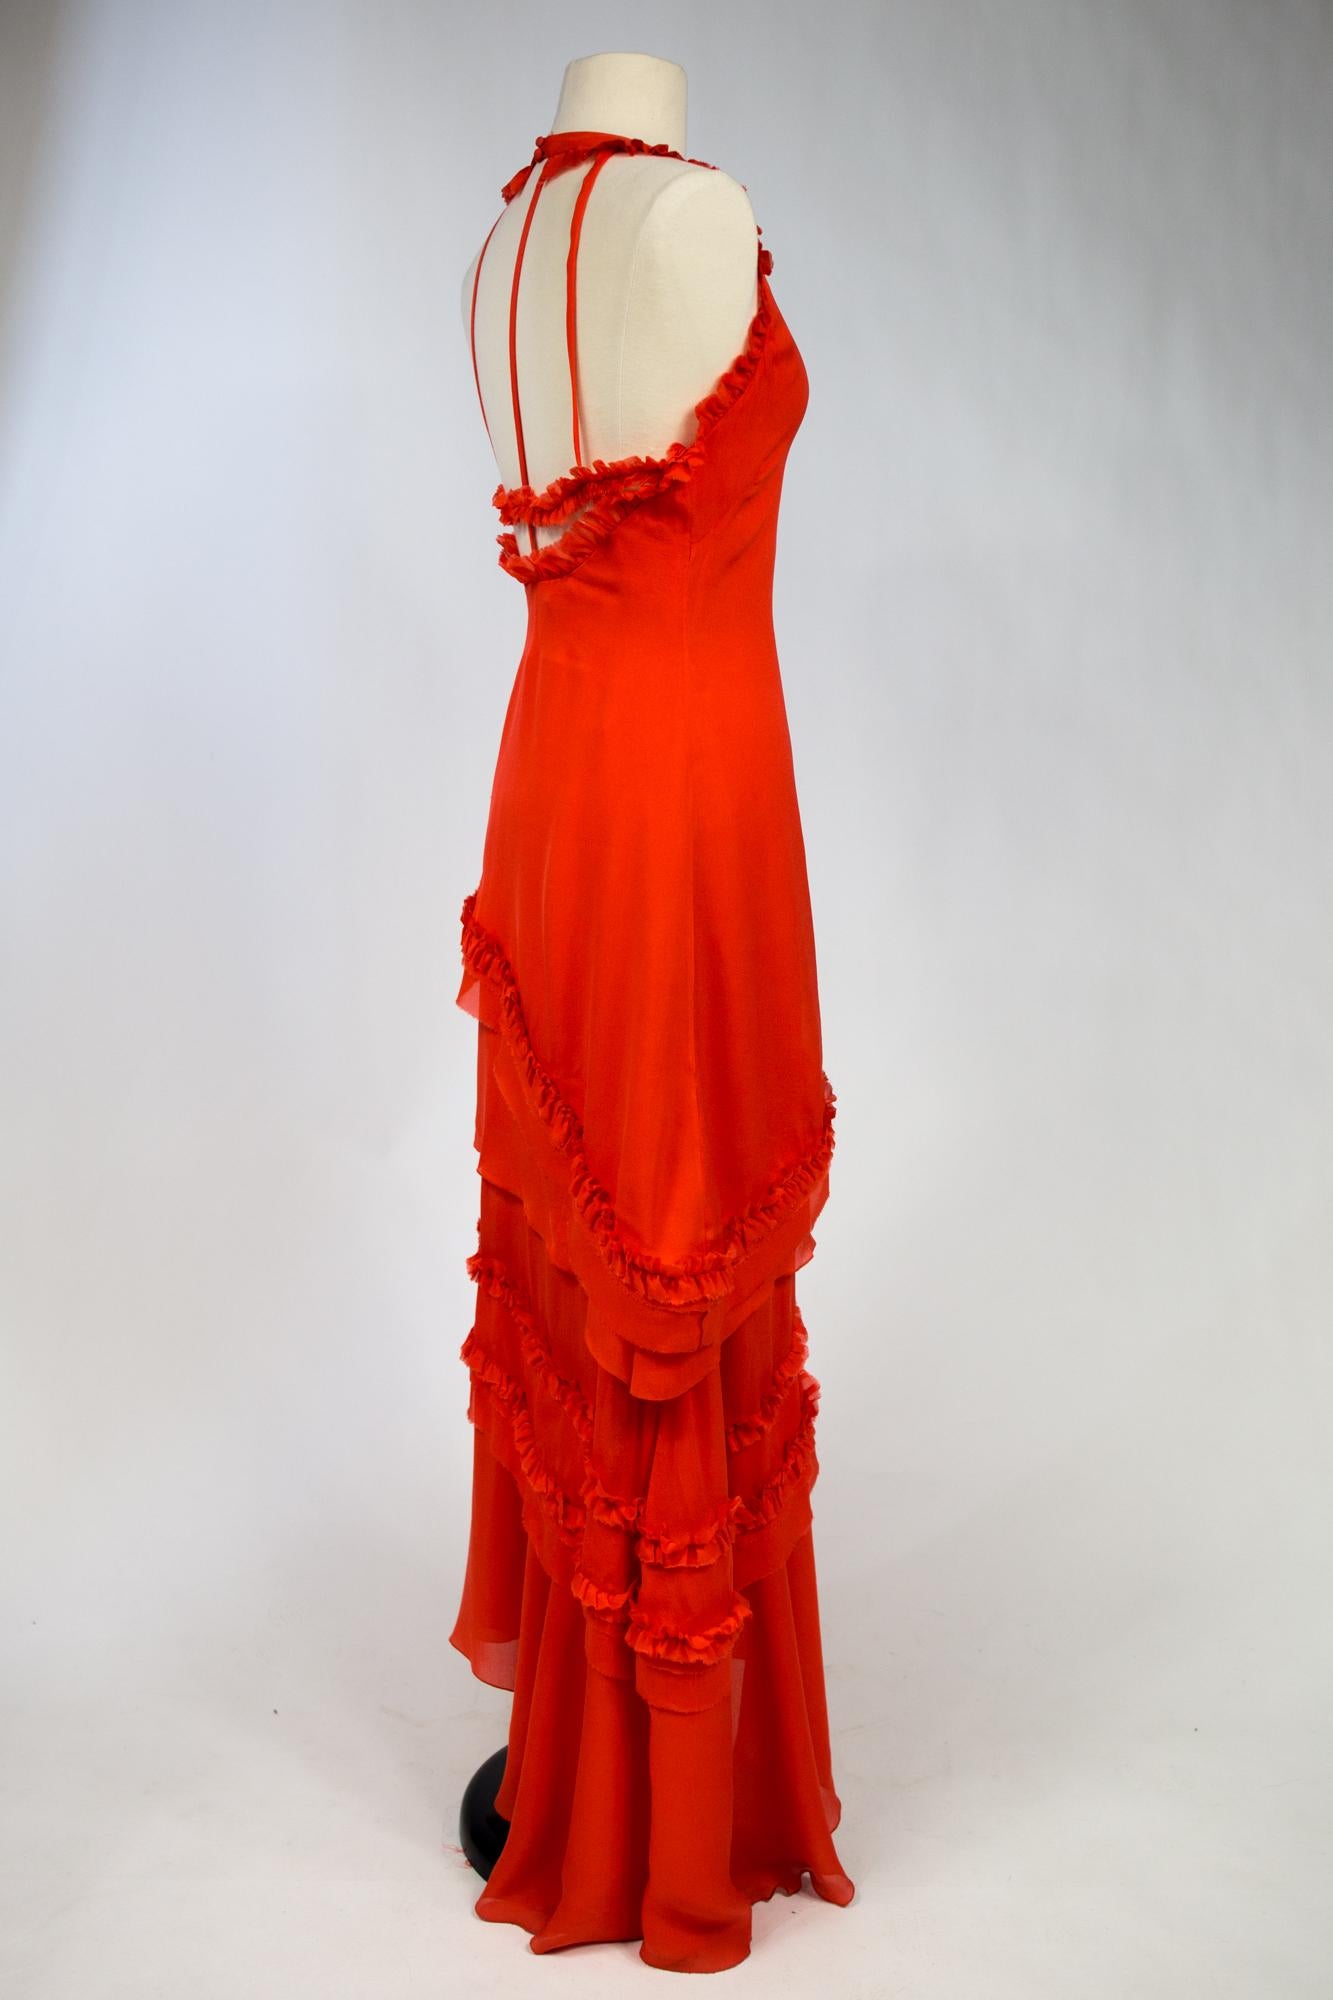 Women's A Thierry Mugler Couture Evening Dress in Coral Silk Crepe Circa 1997/2002 For Sale